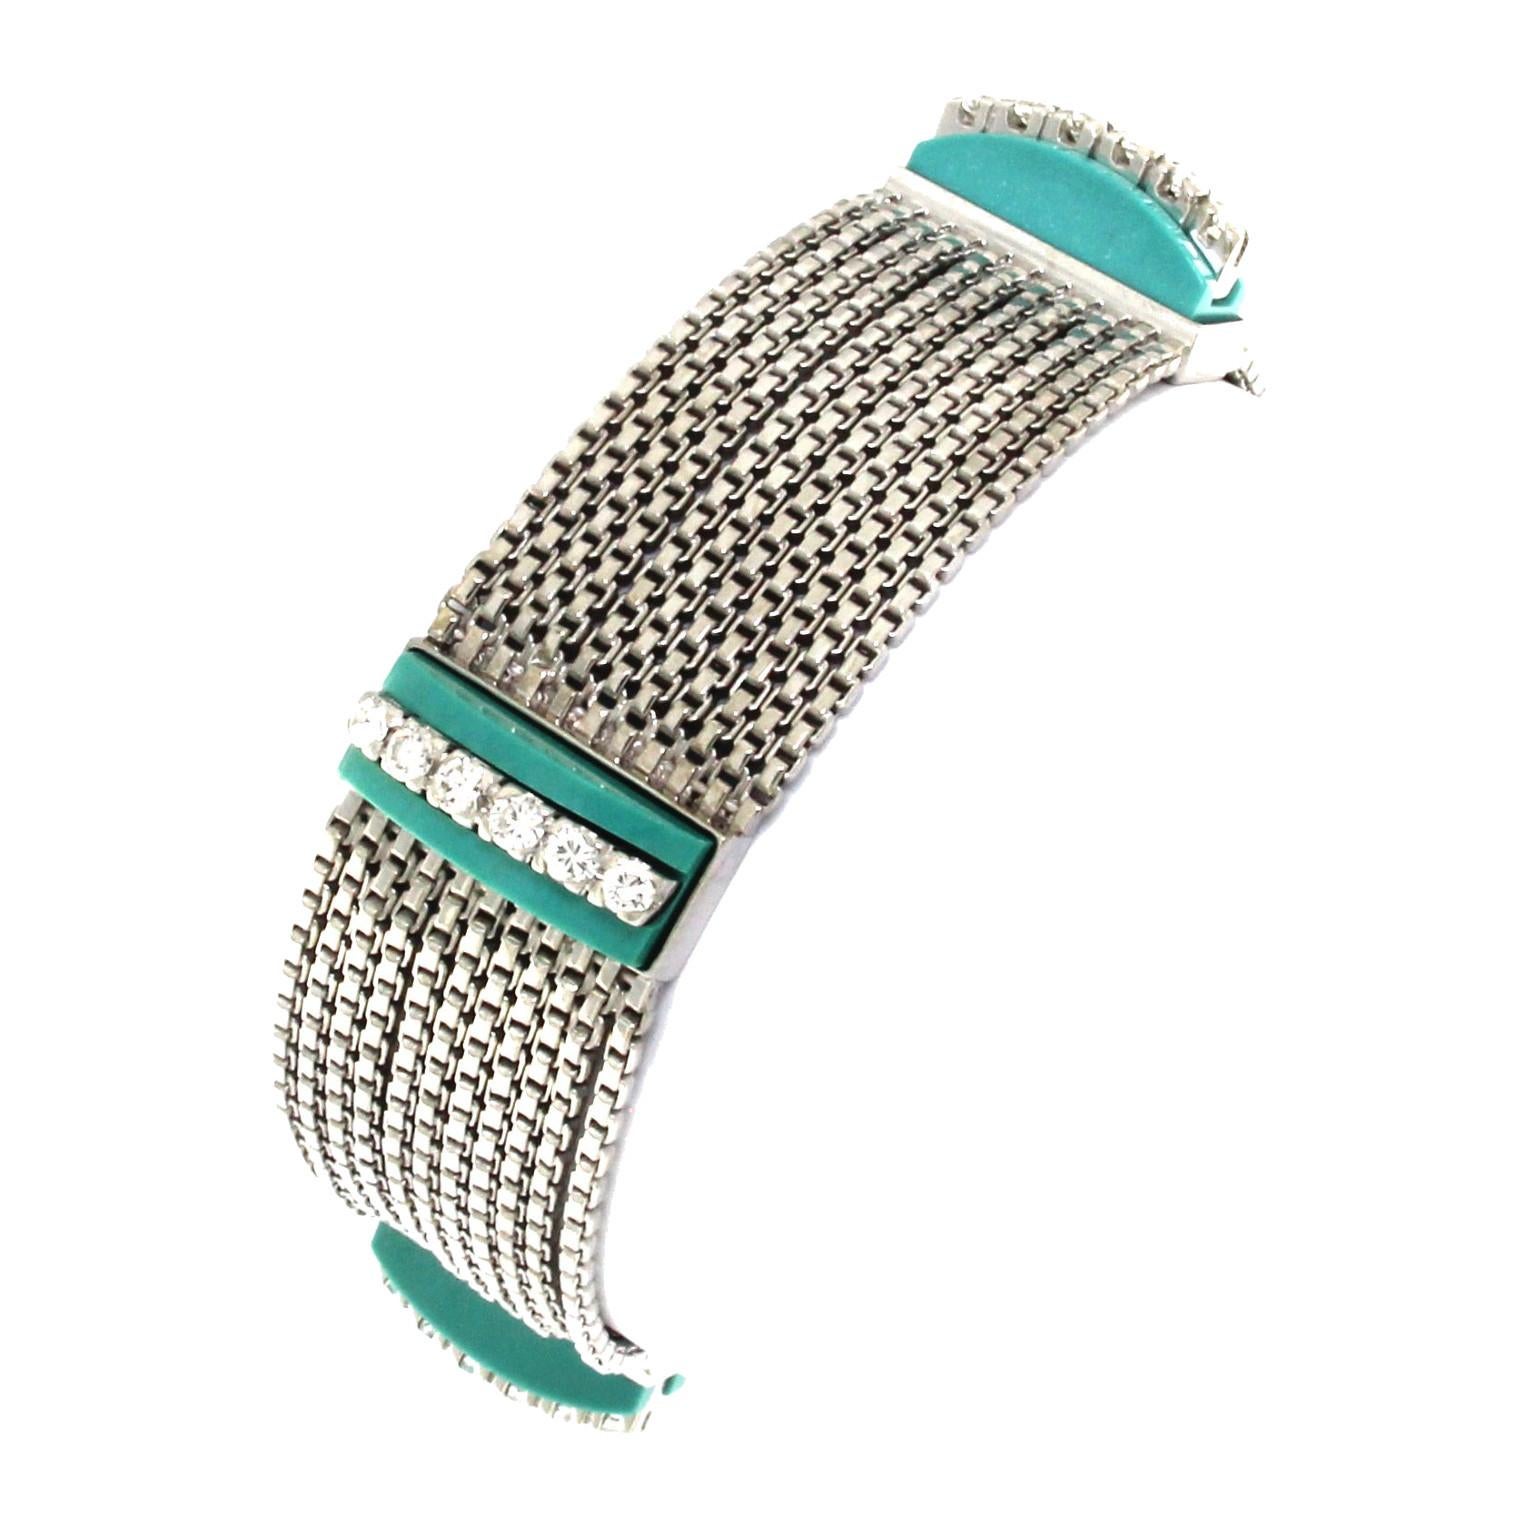 18 Karat White Gold Multichain Bracelet with Diamonds and Turquoise